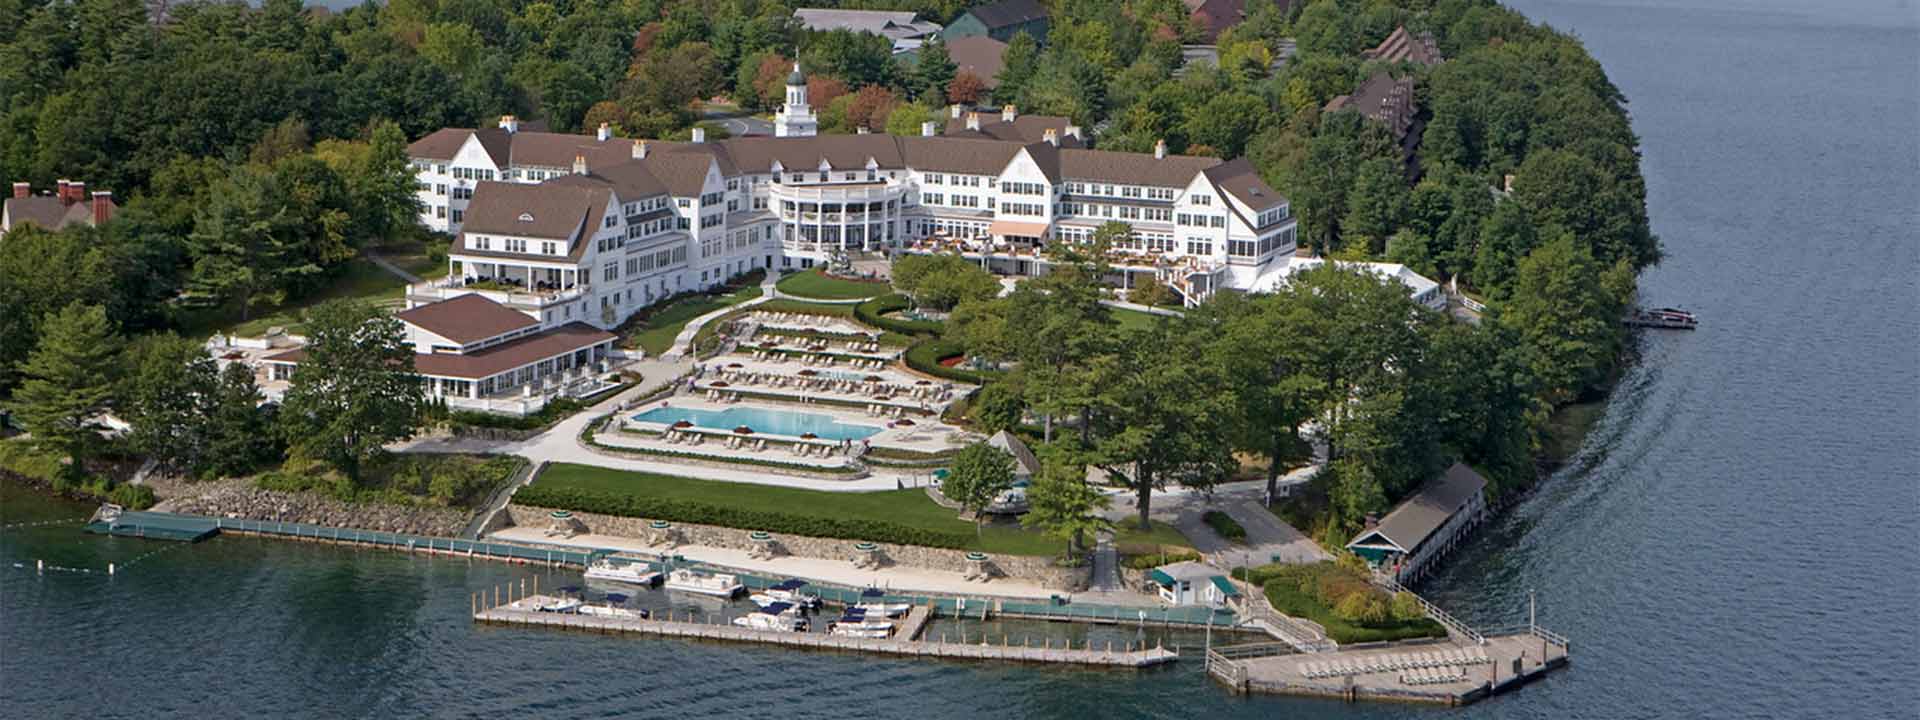 A view of The Sagamore Resort in New York.